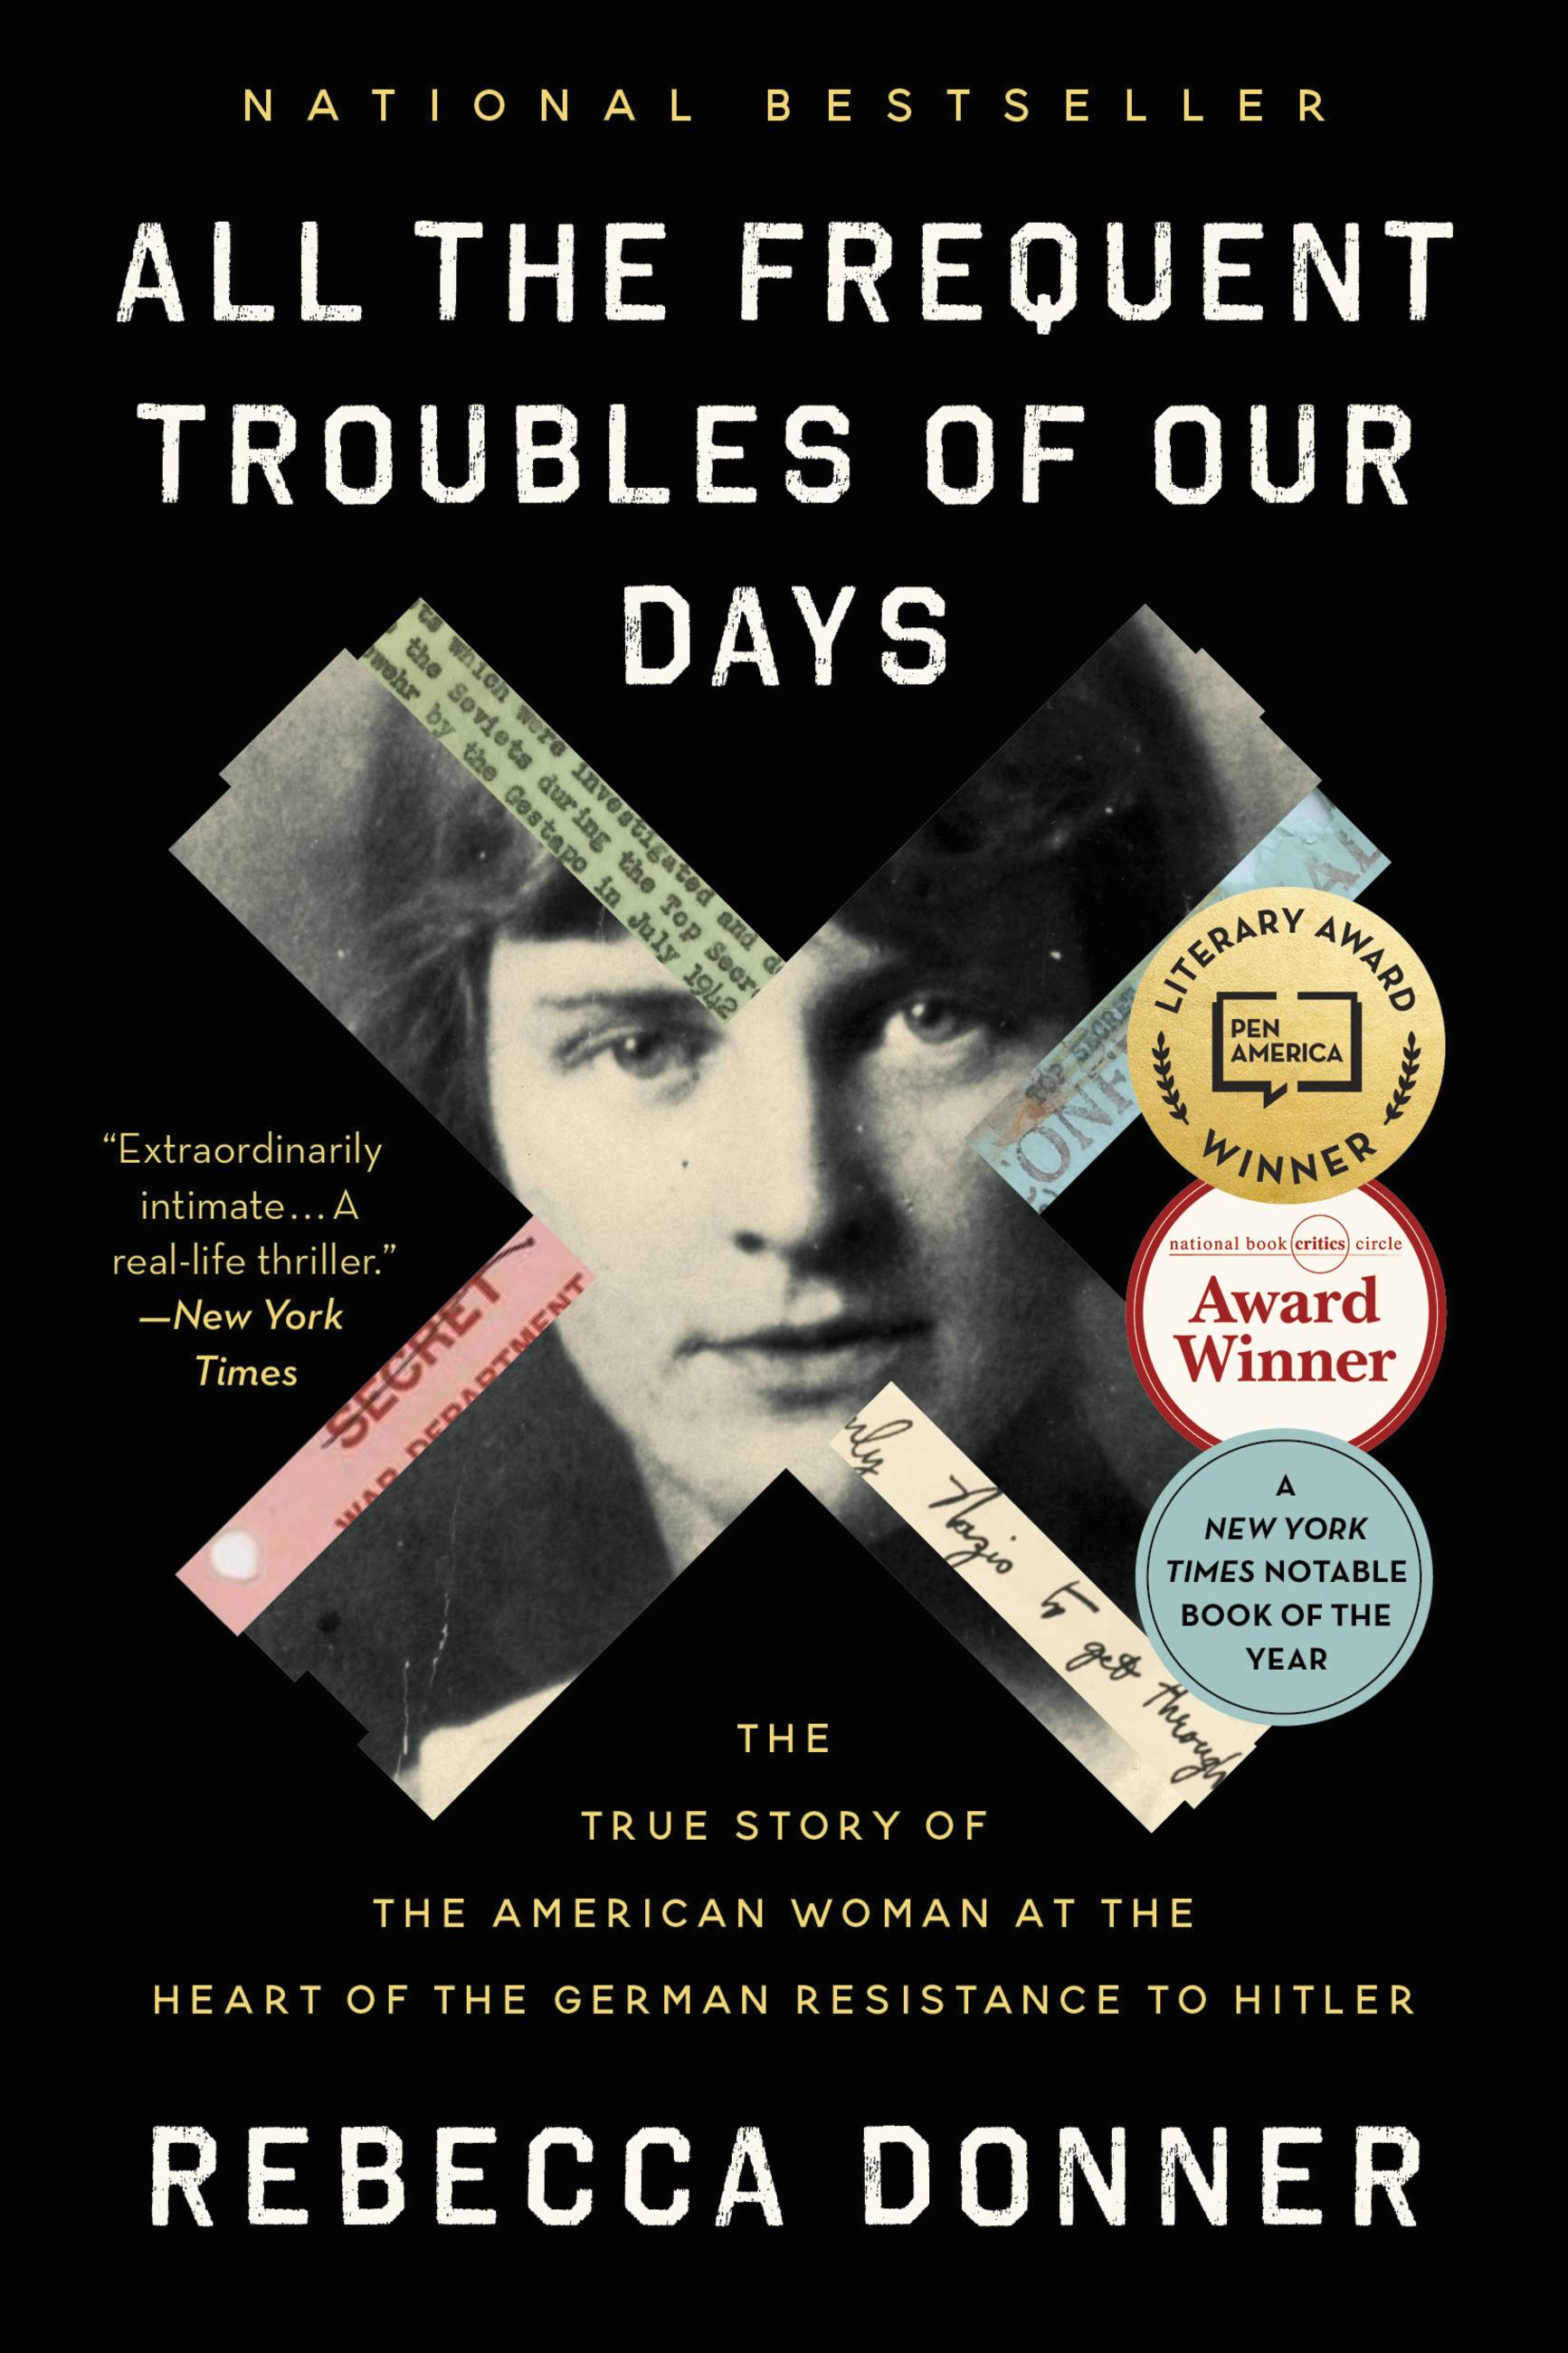 the　Donner　by　All　Group　Days　Book　of　Frequent　Troubles　Hachette　Our　Rebecca